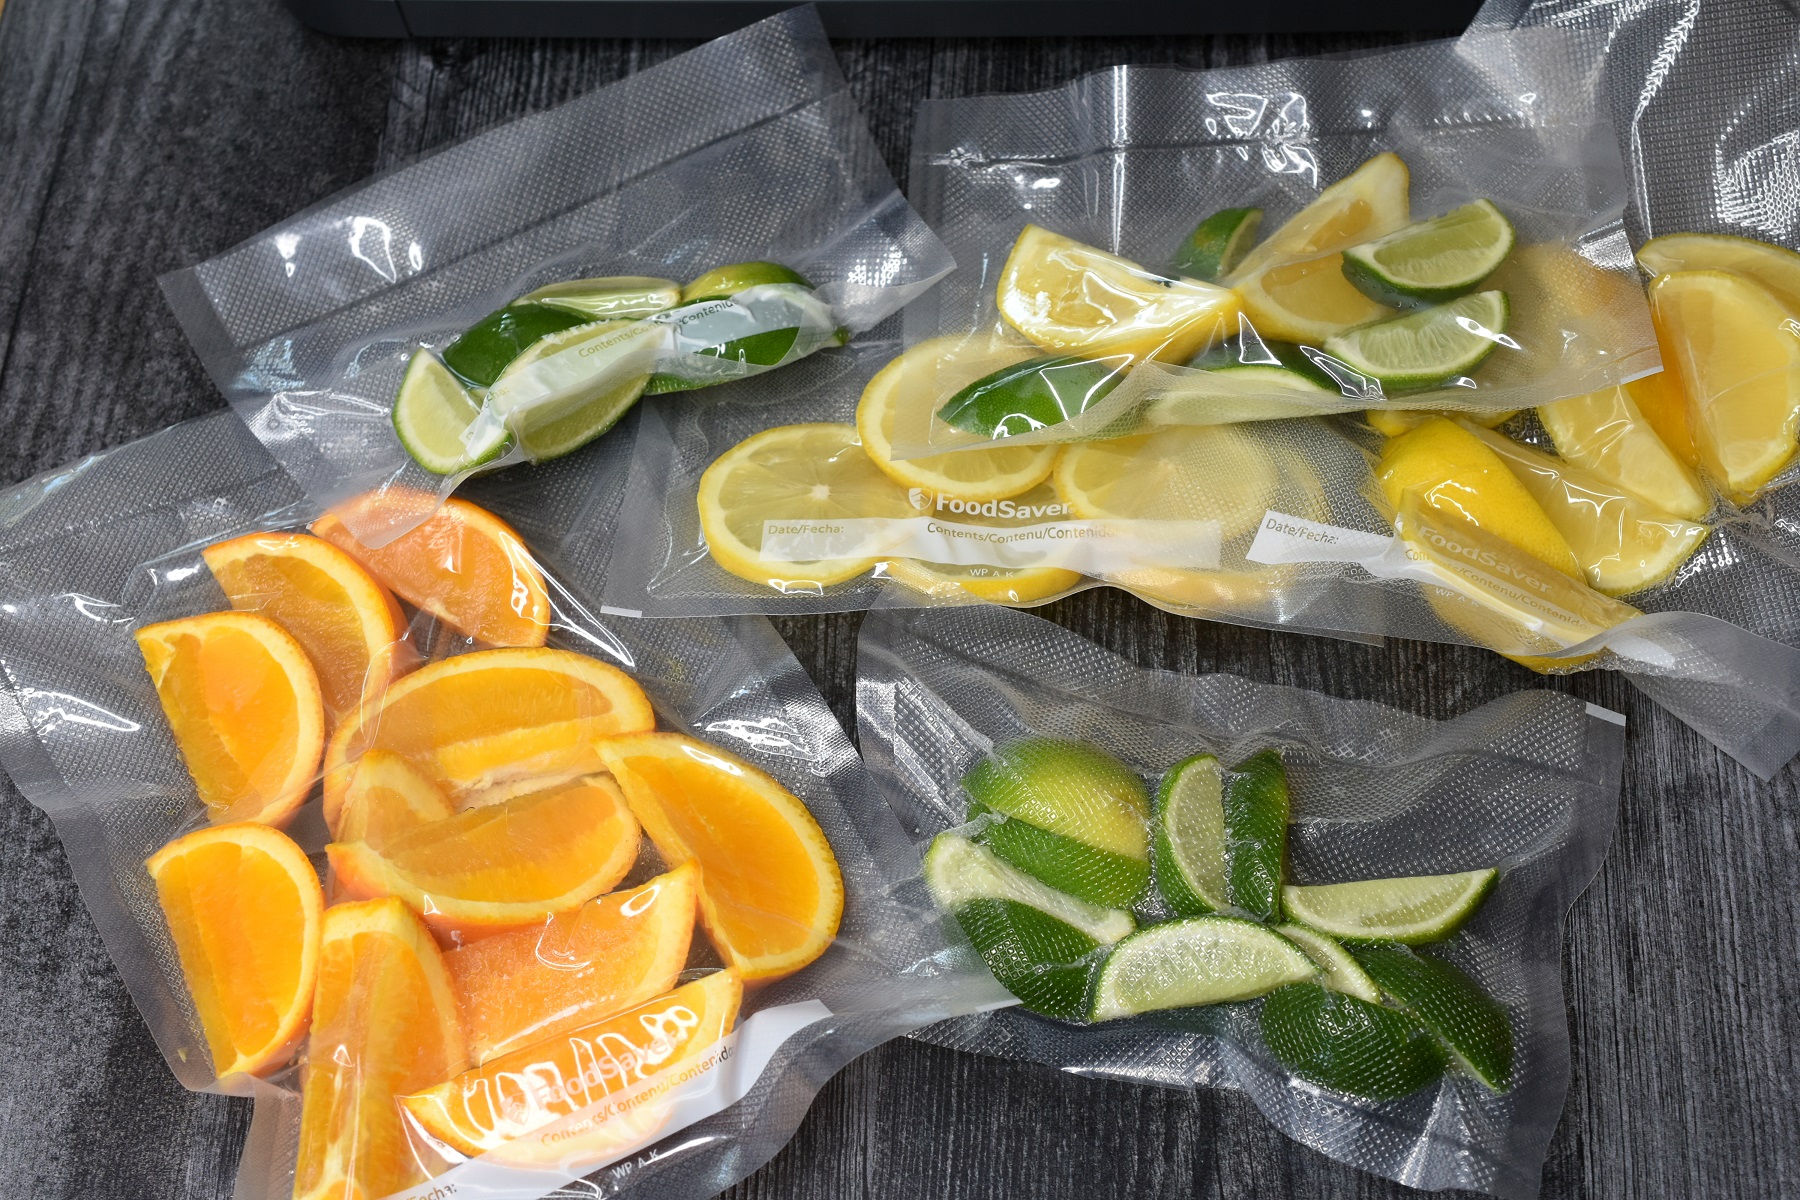 Can you freeze limes and lemons? Yes, here is how to freeze lemons and limes